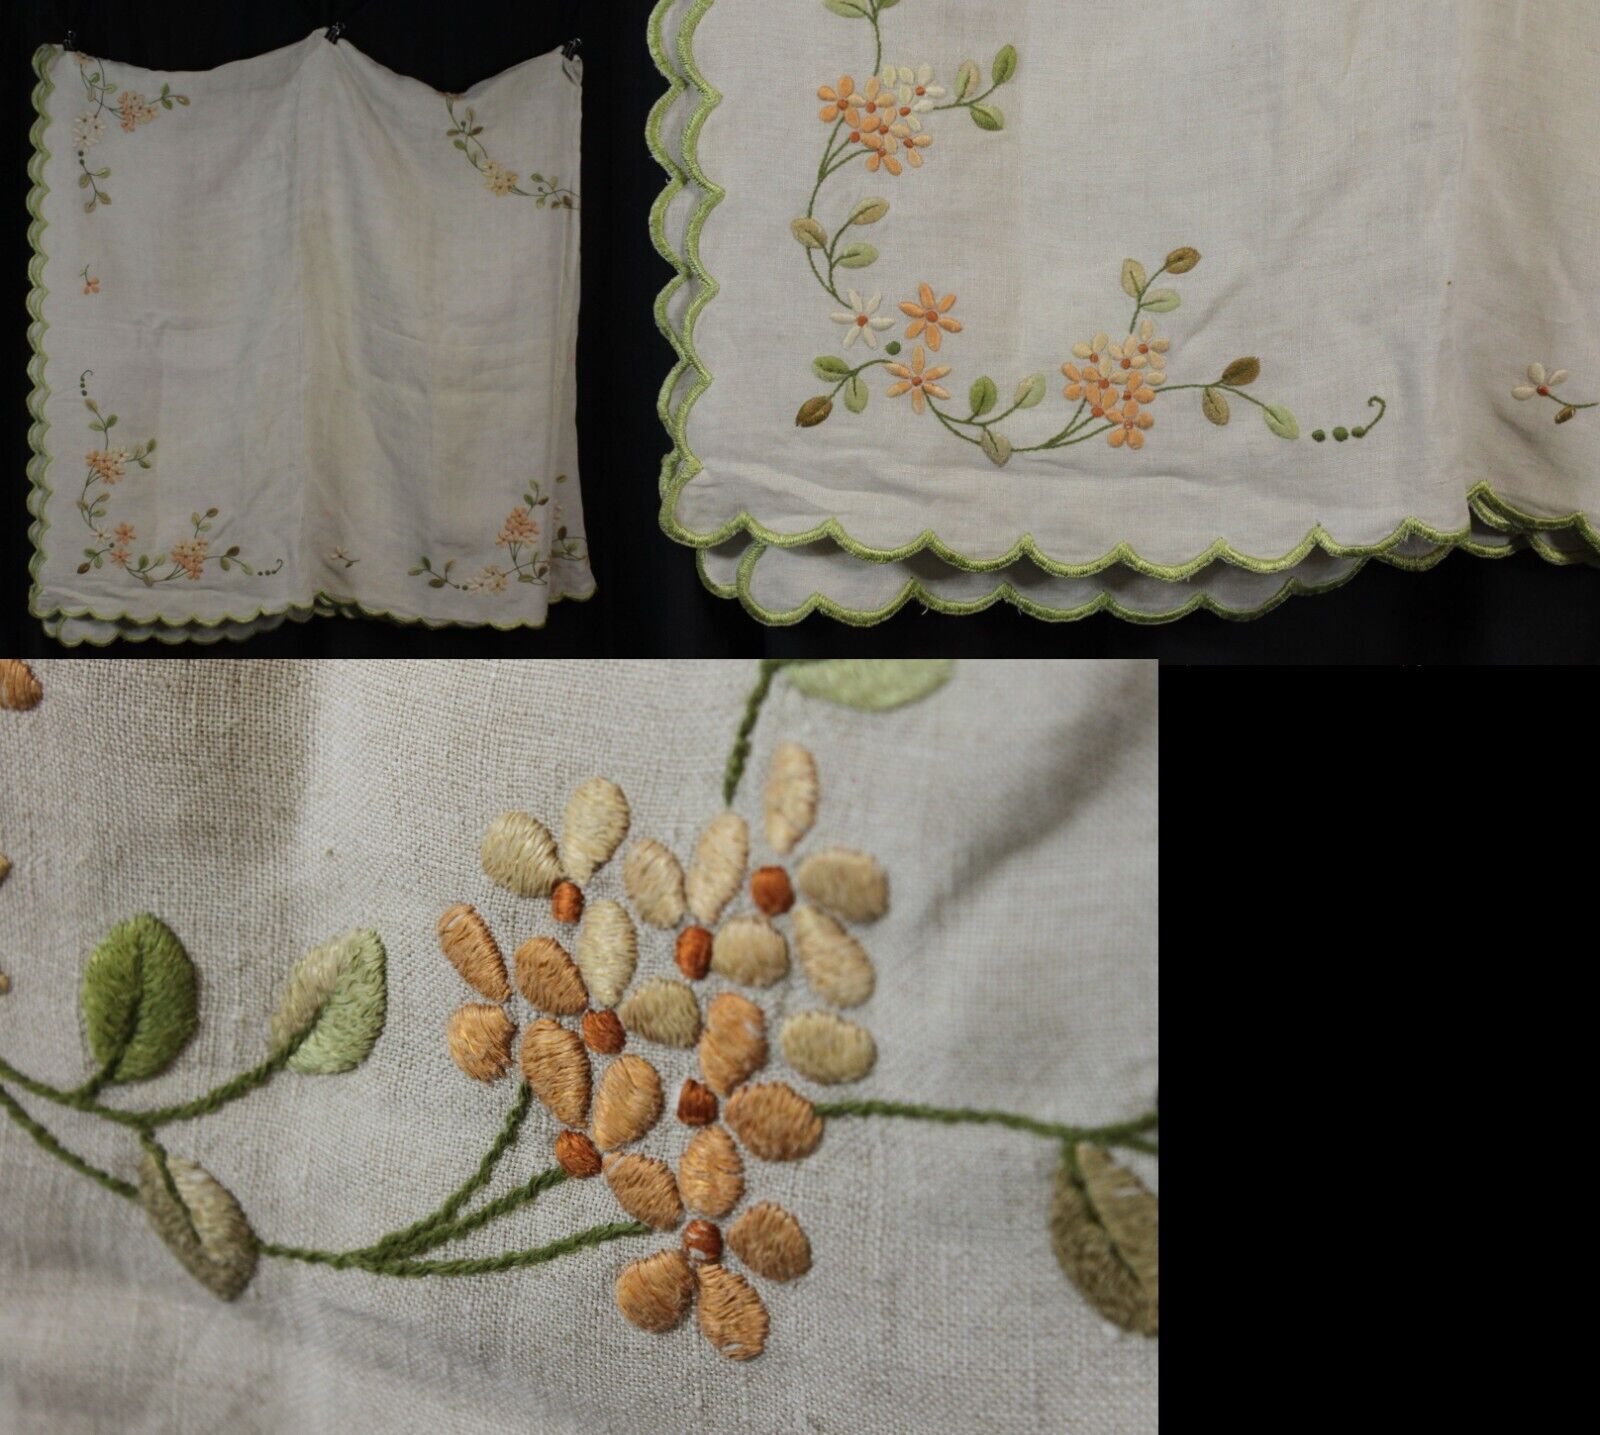 Vtg Embroidered Tablecloth Woven Floral Scalloped Edge Cream Ivory Ornate 66x66